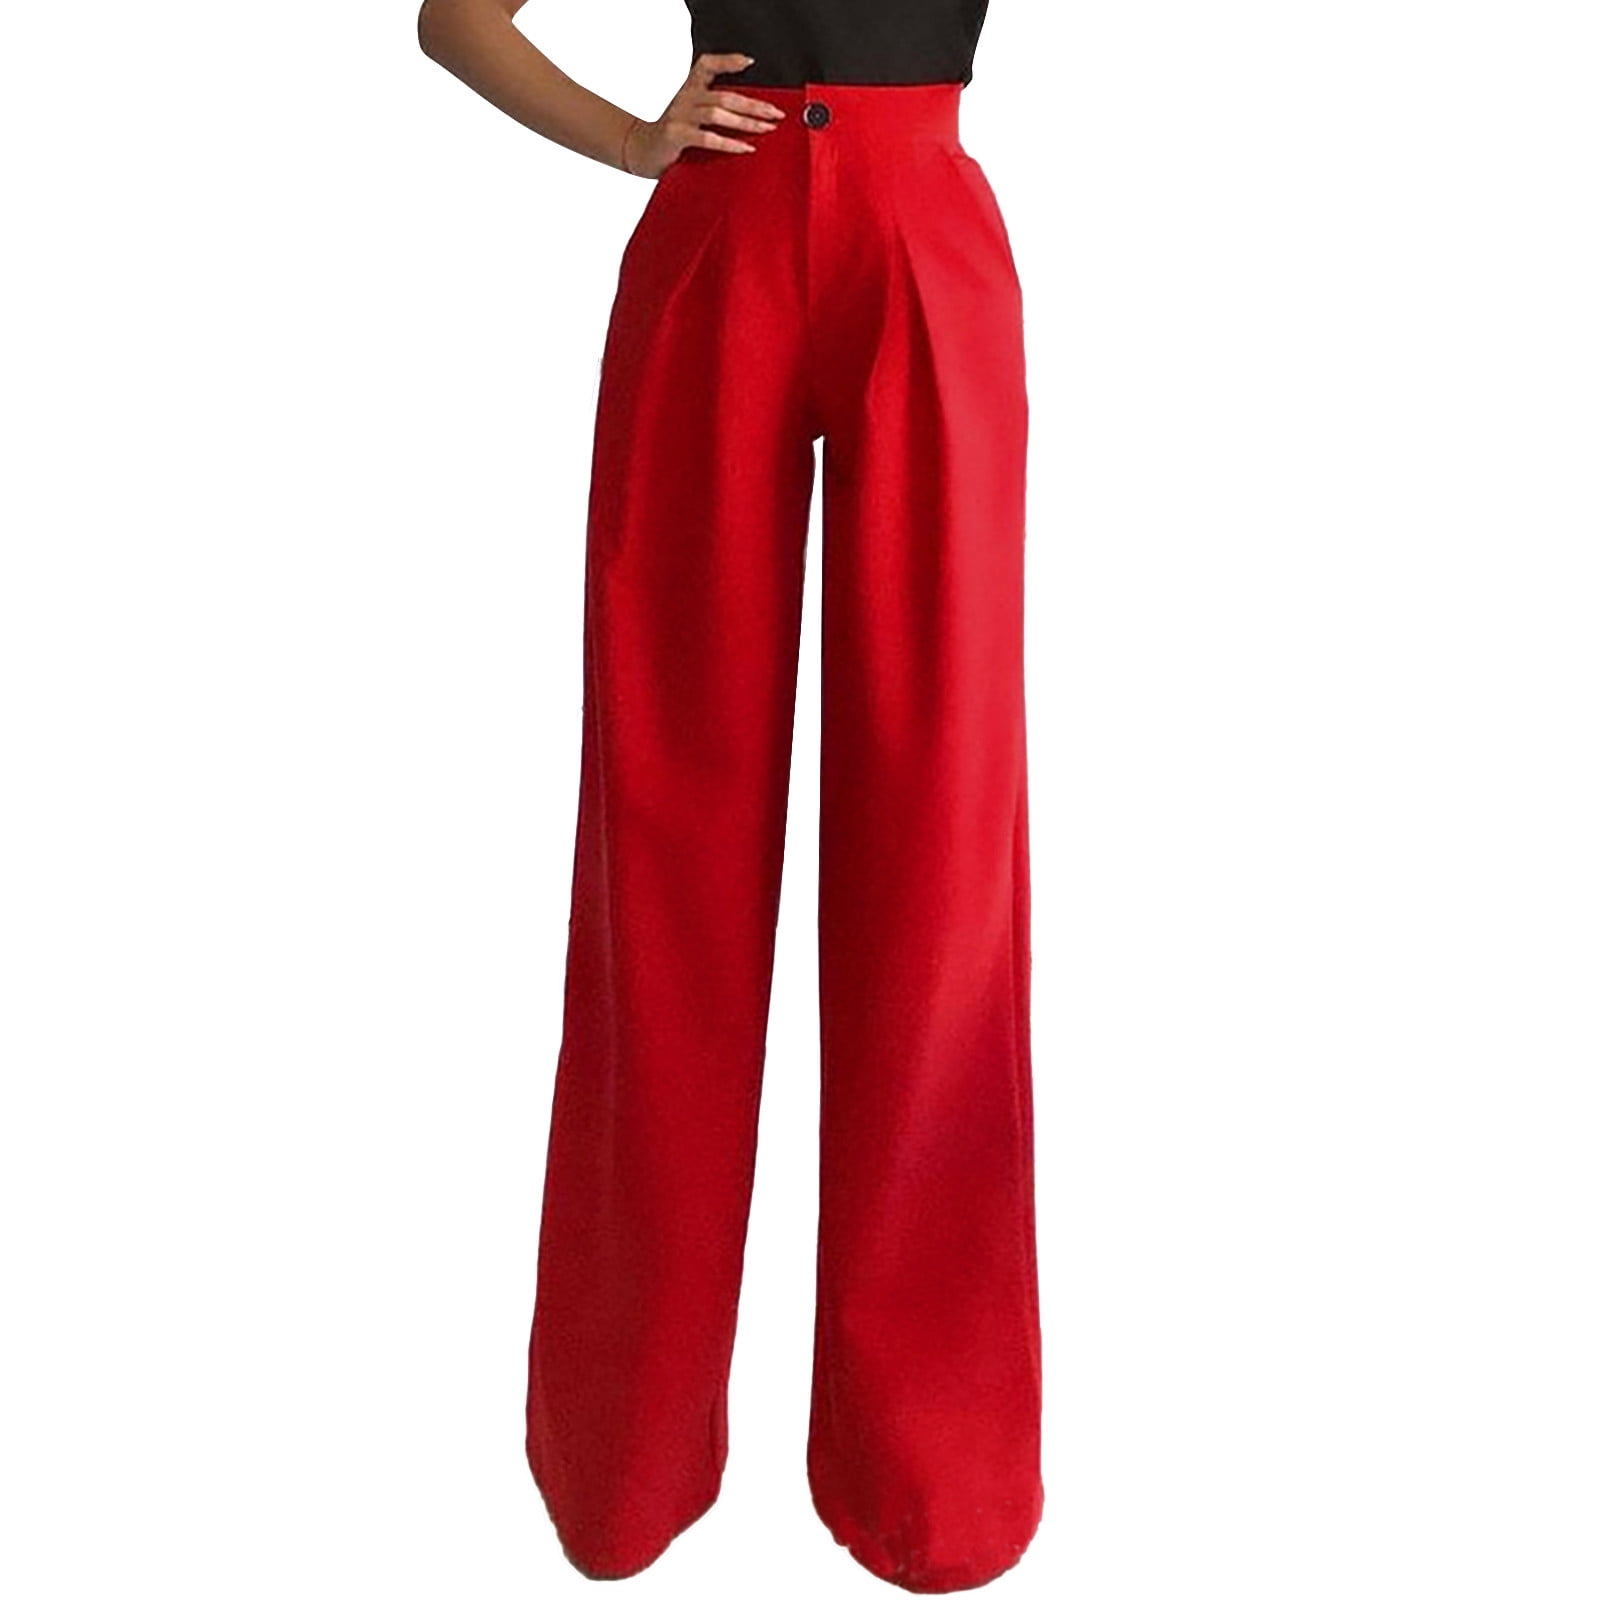 HSMQHJWE Girl Sweatpants Petite Dress Pants For Women Business Casual Womens  Solid Casual High Waisted Wide Leg Palazzo Pants Trousers Soft Women 